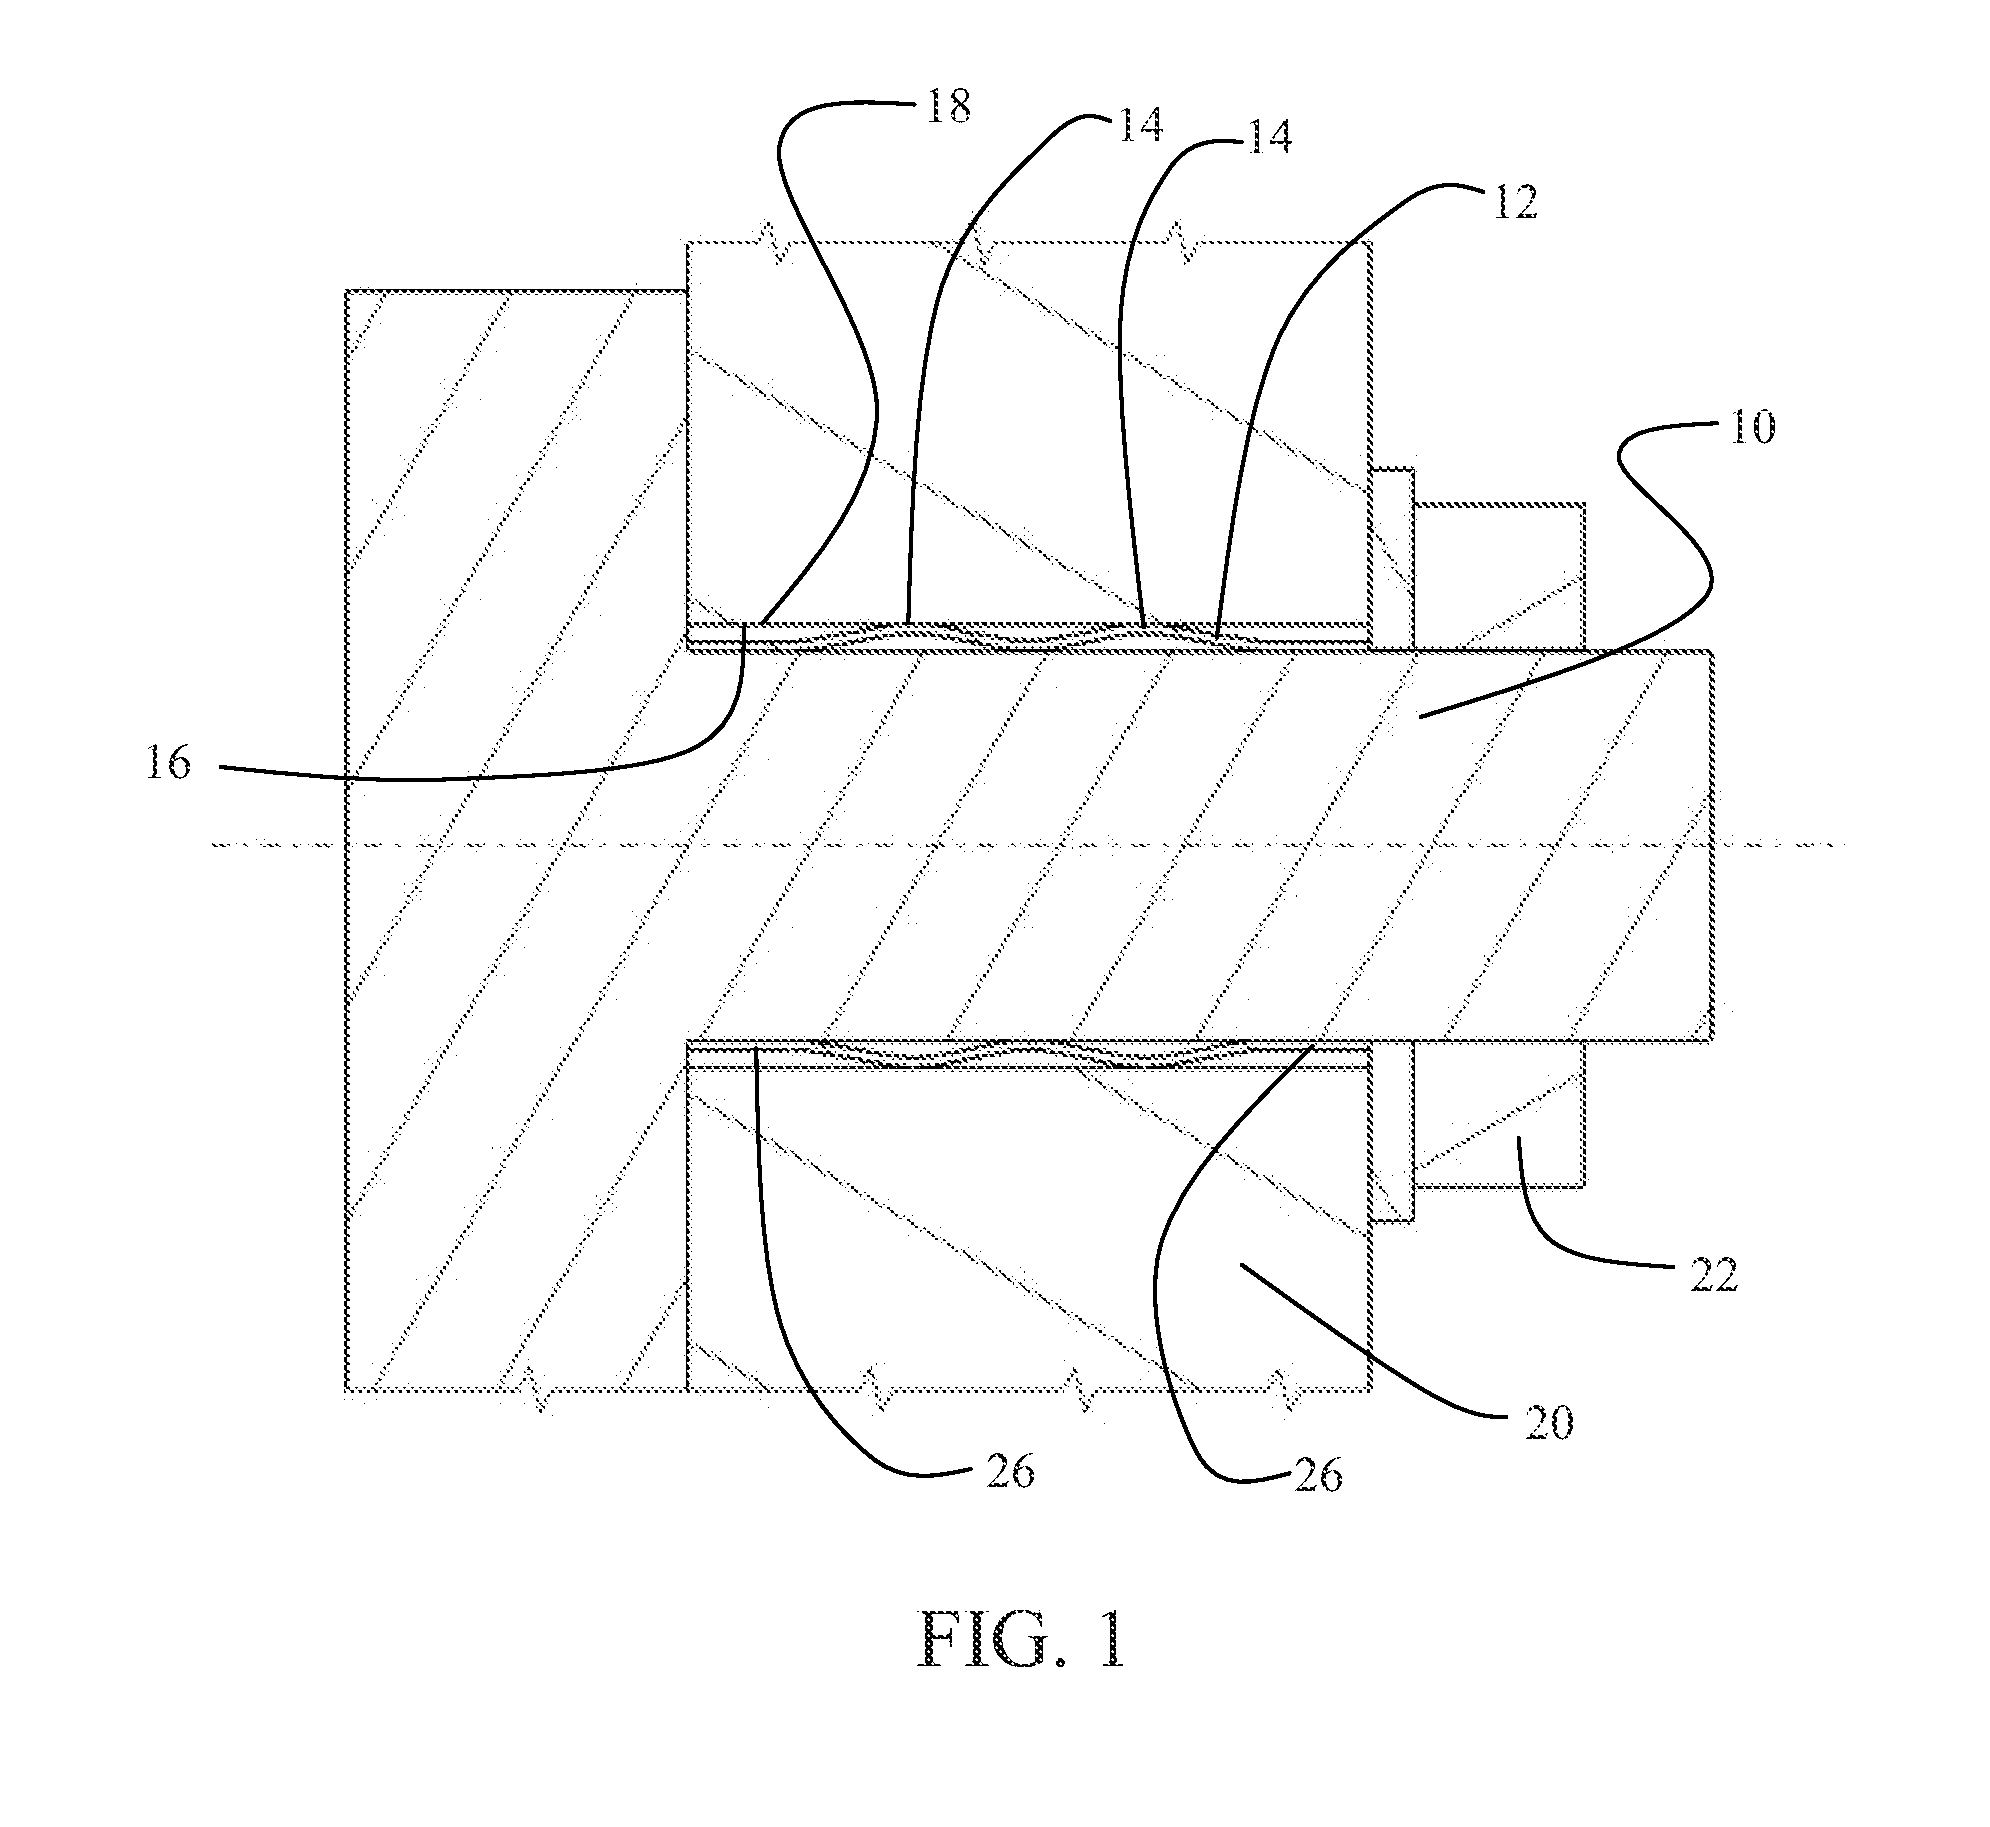 Electrically conductive bushing connection to structure for current path